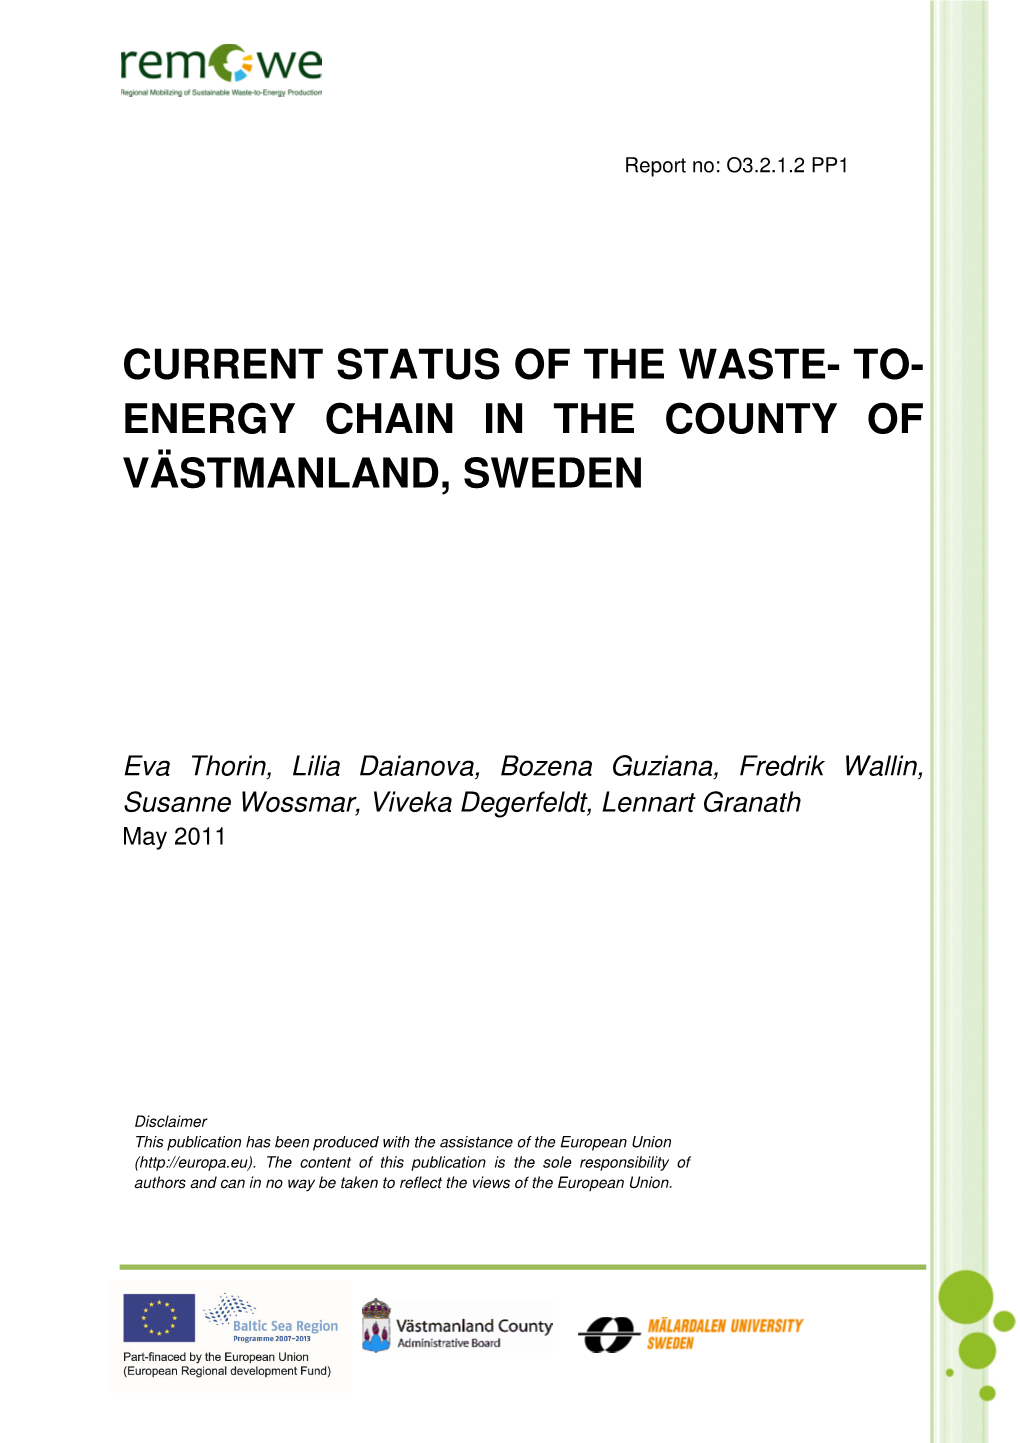 Current Status of the Waste- To- Energy Chain in the County of Västmanland